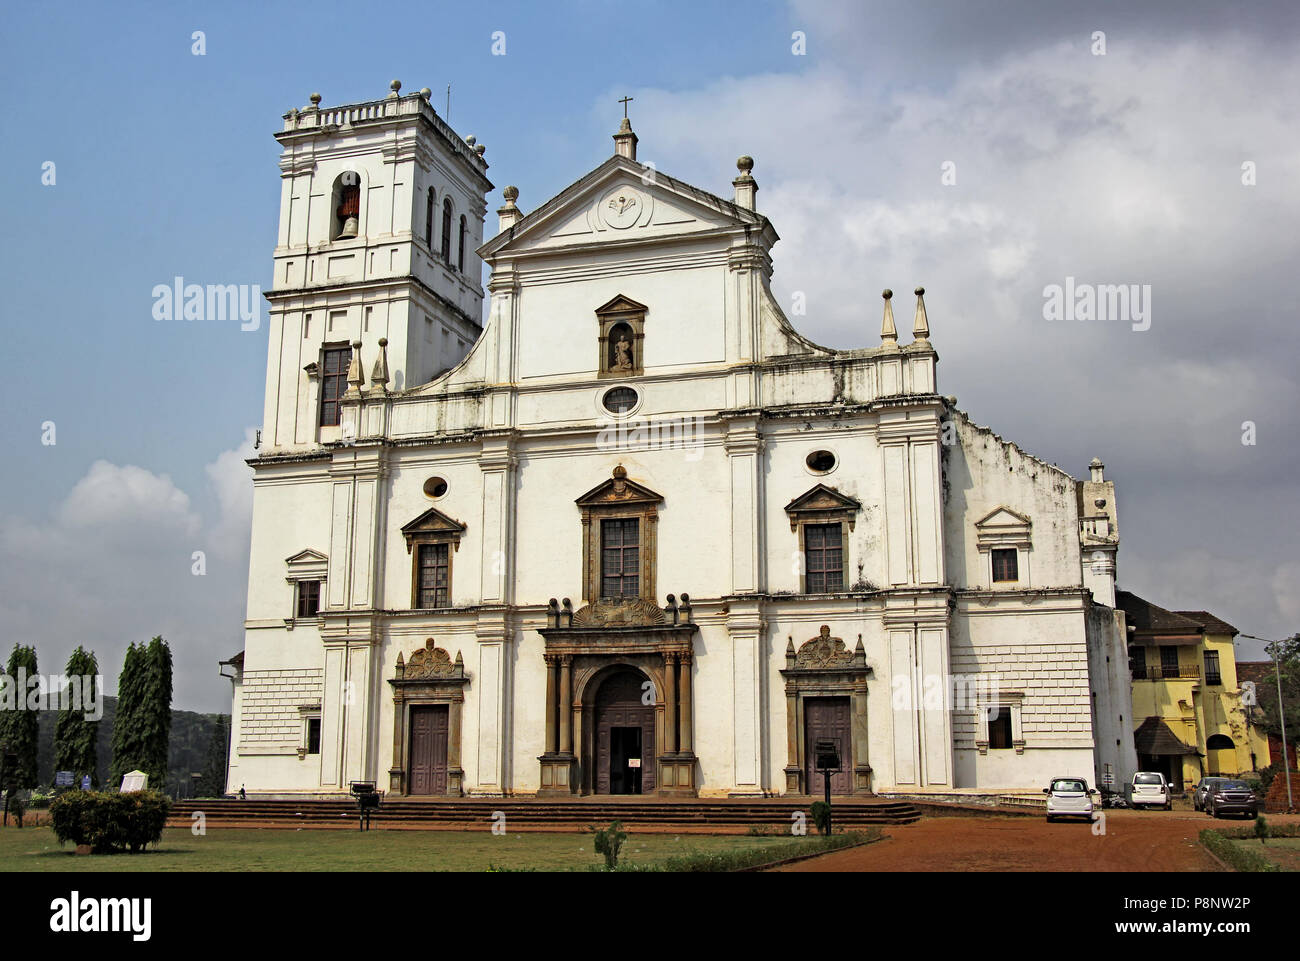 Facade of historic Se Cathedral, St Catherine’s Cathedral, in Old Goa, India. Built by the Portuguese in 16th Century, is the largest church in Asia. Stock Photo